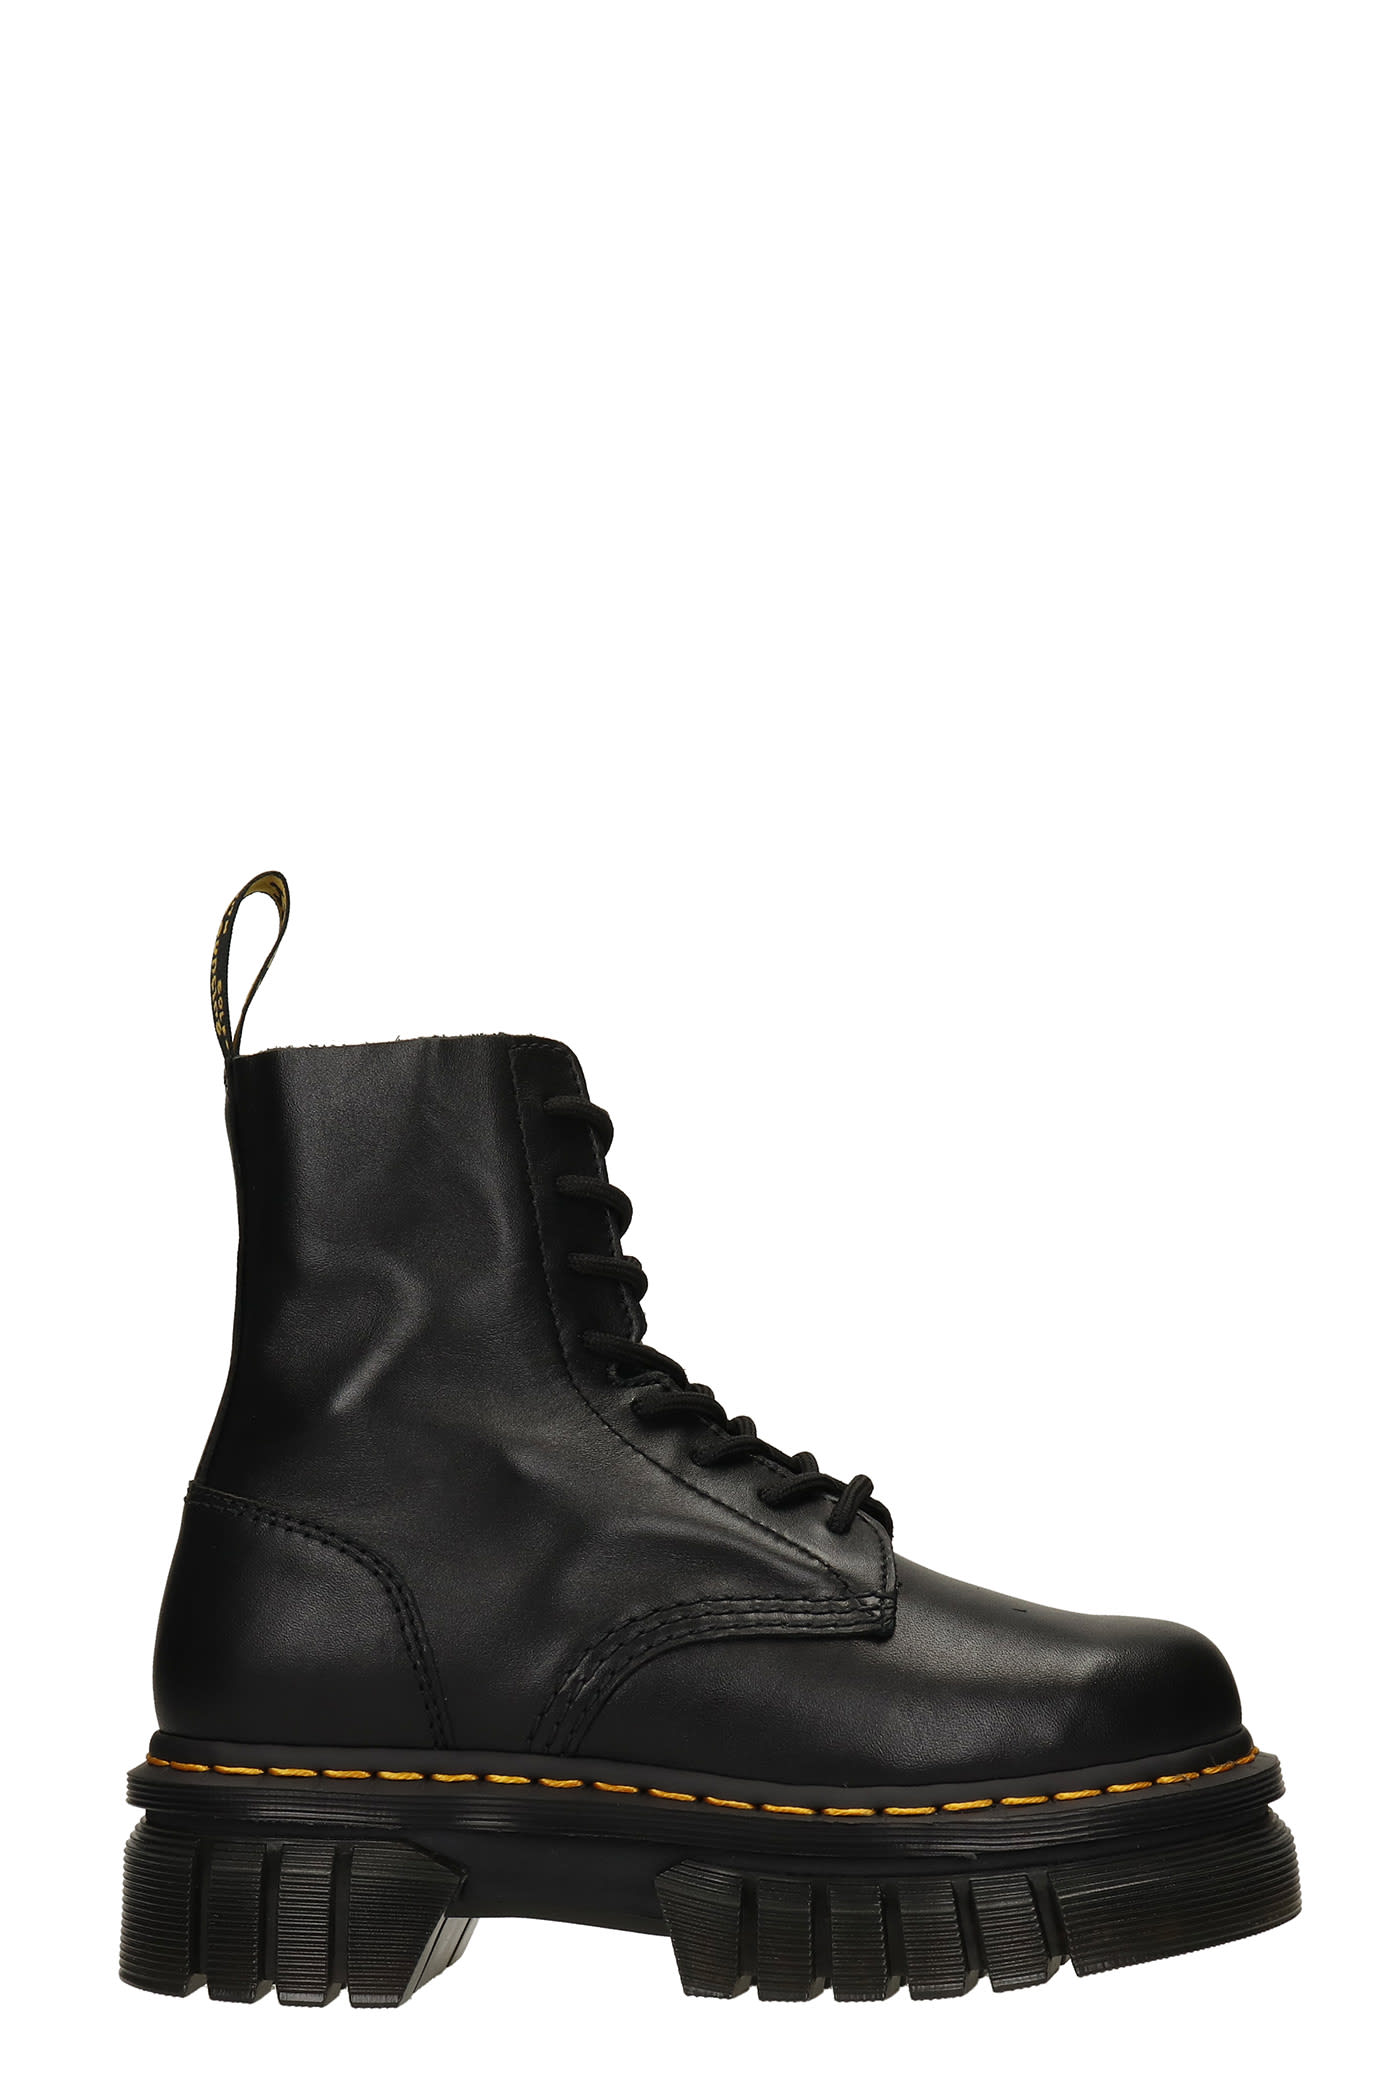 Dr. Martens Audrick Combat Boots In Black Leather